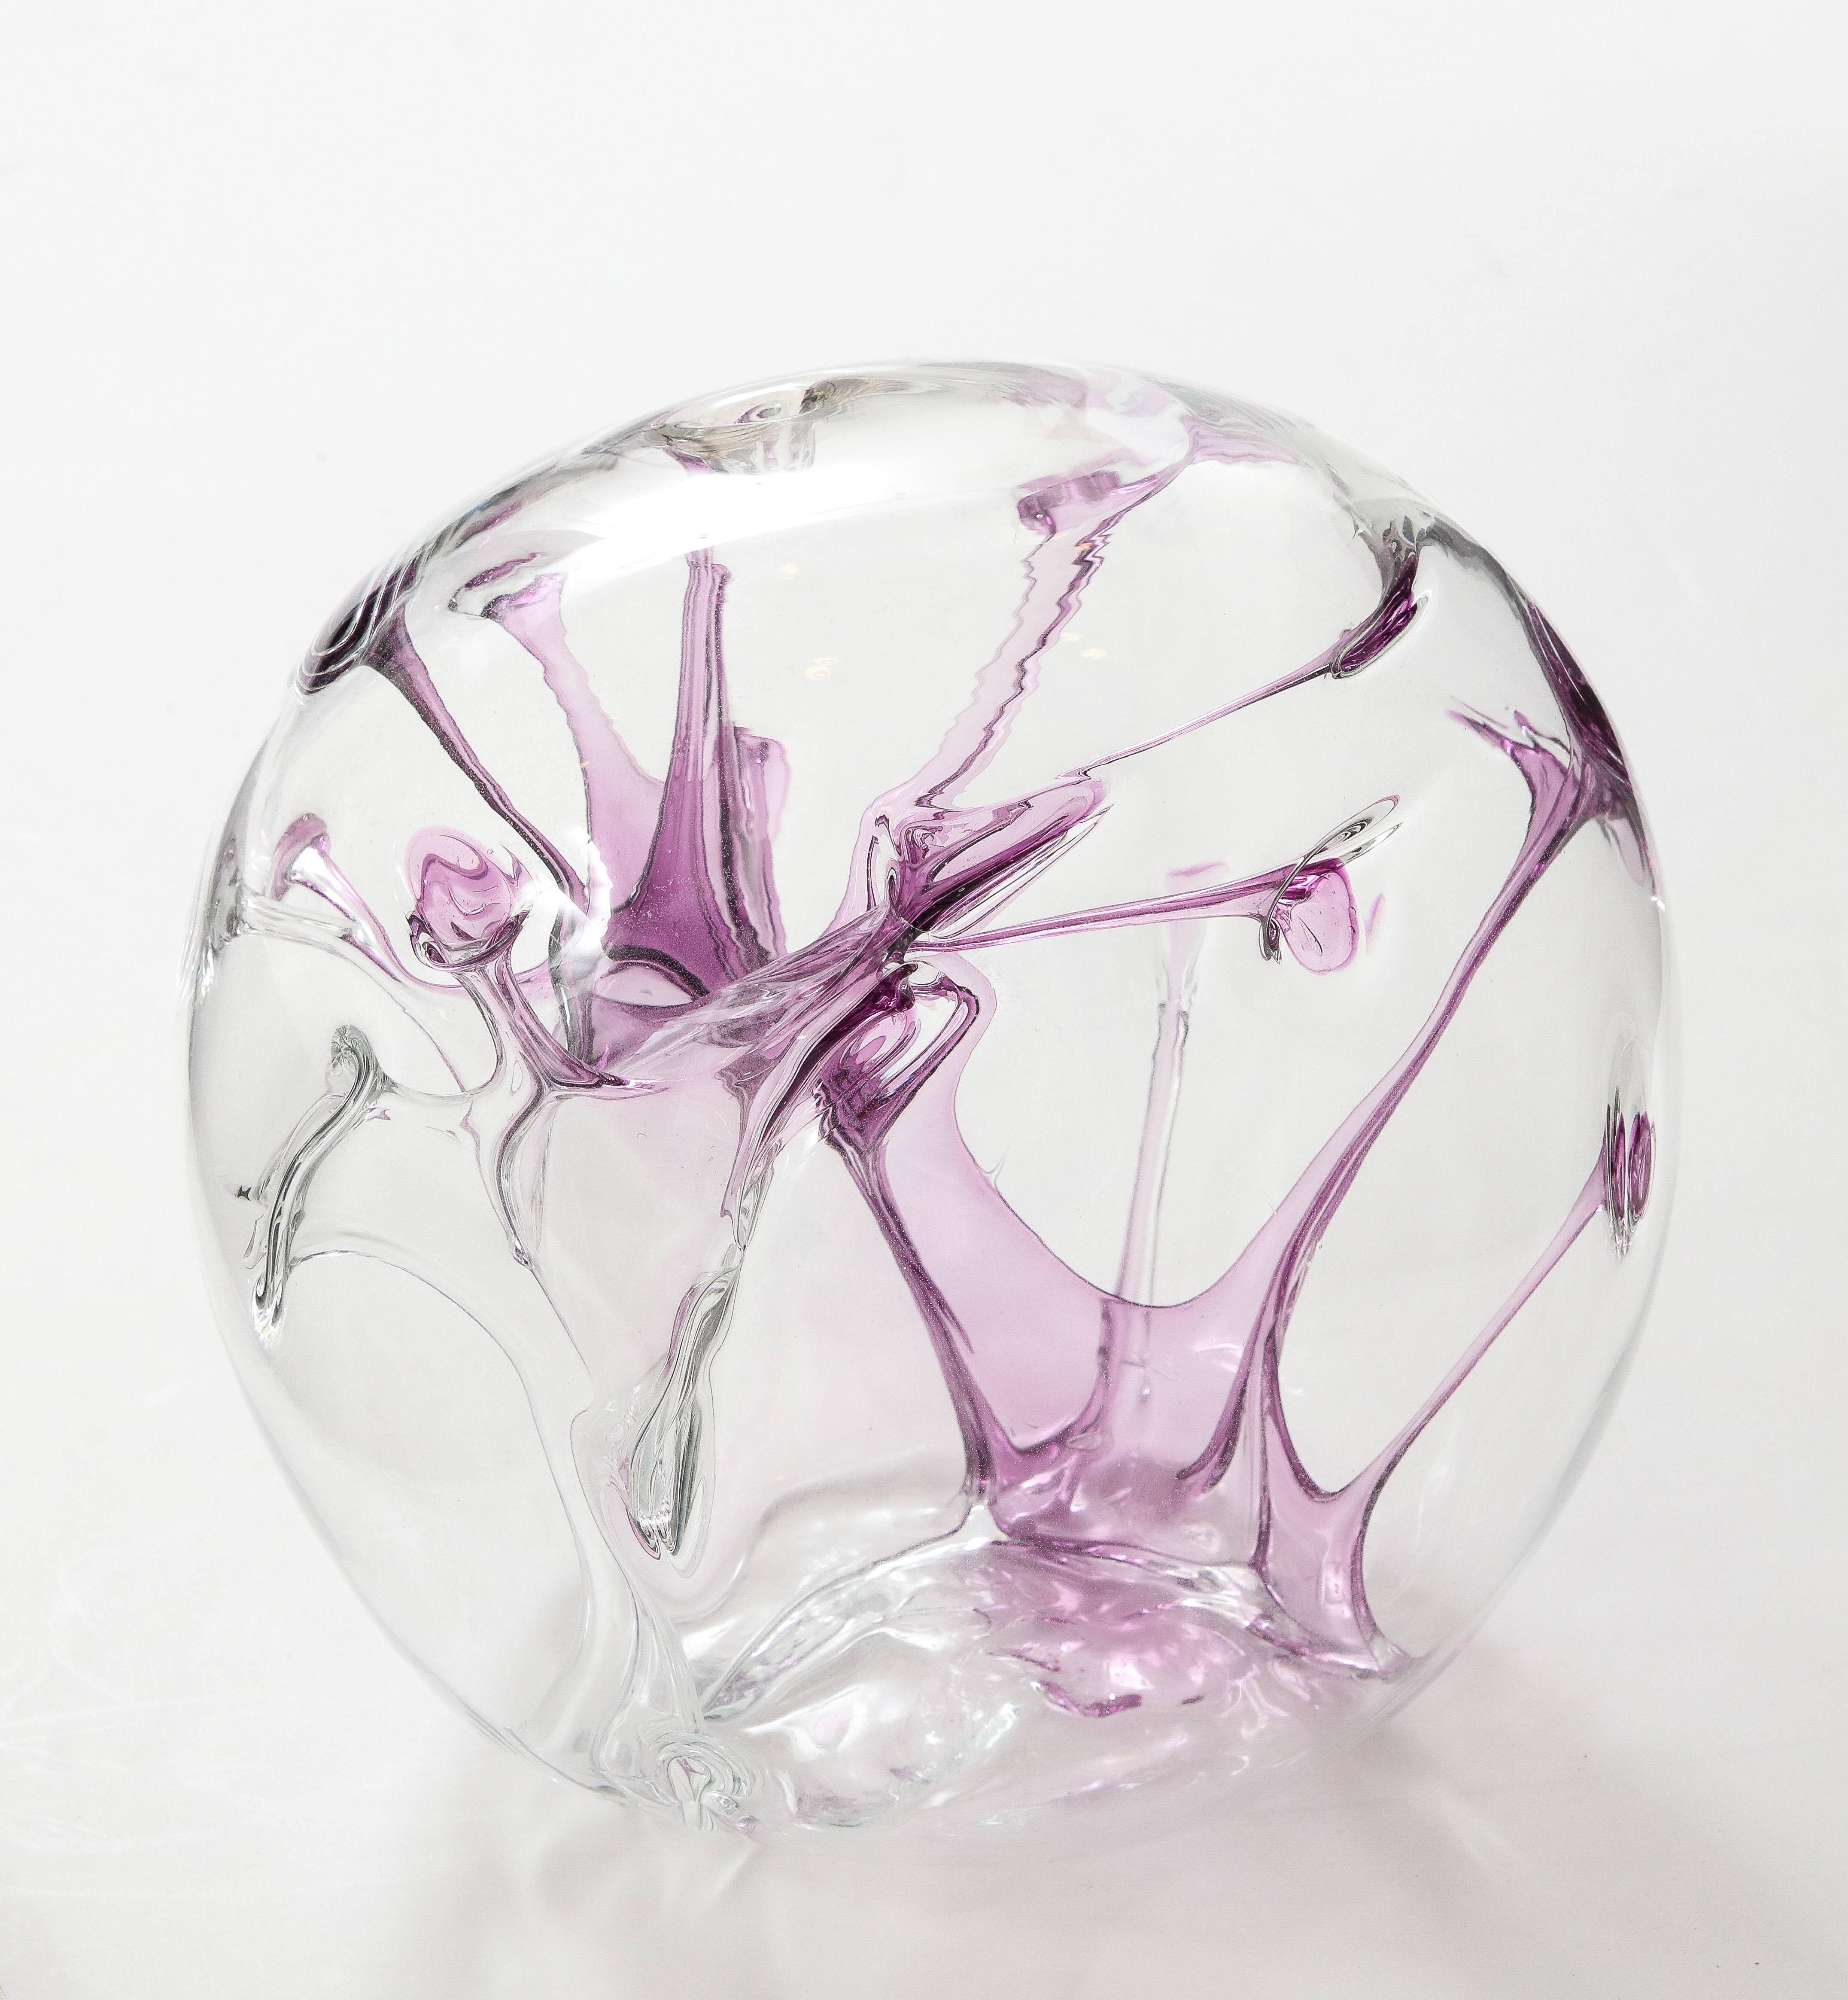 Contemporary mouth blown glass orb sculpture with internal Violet threads.
Signed Peter Bramhall.